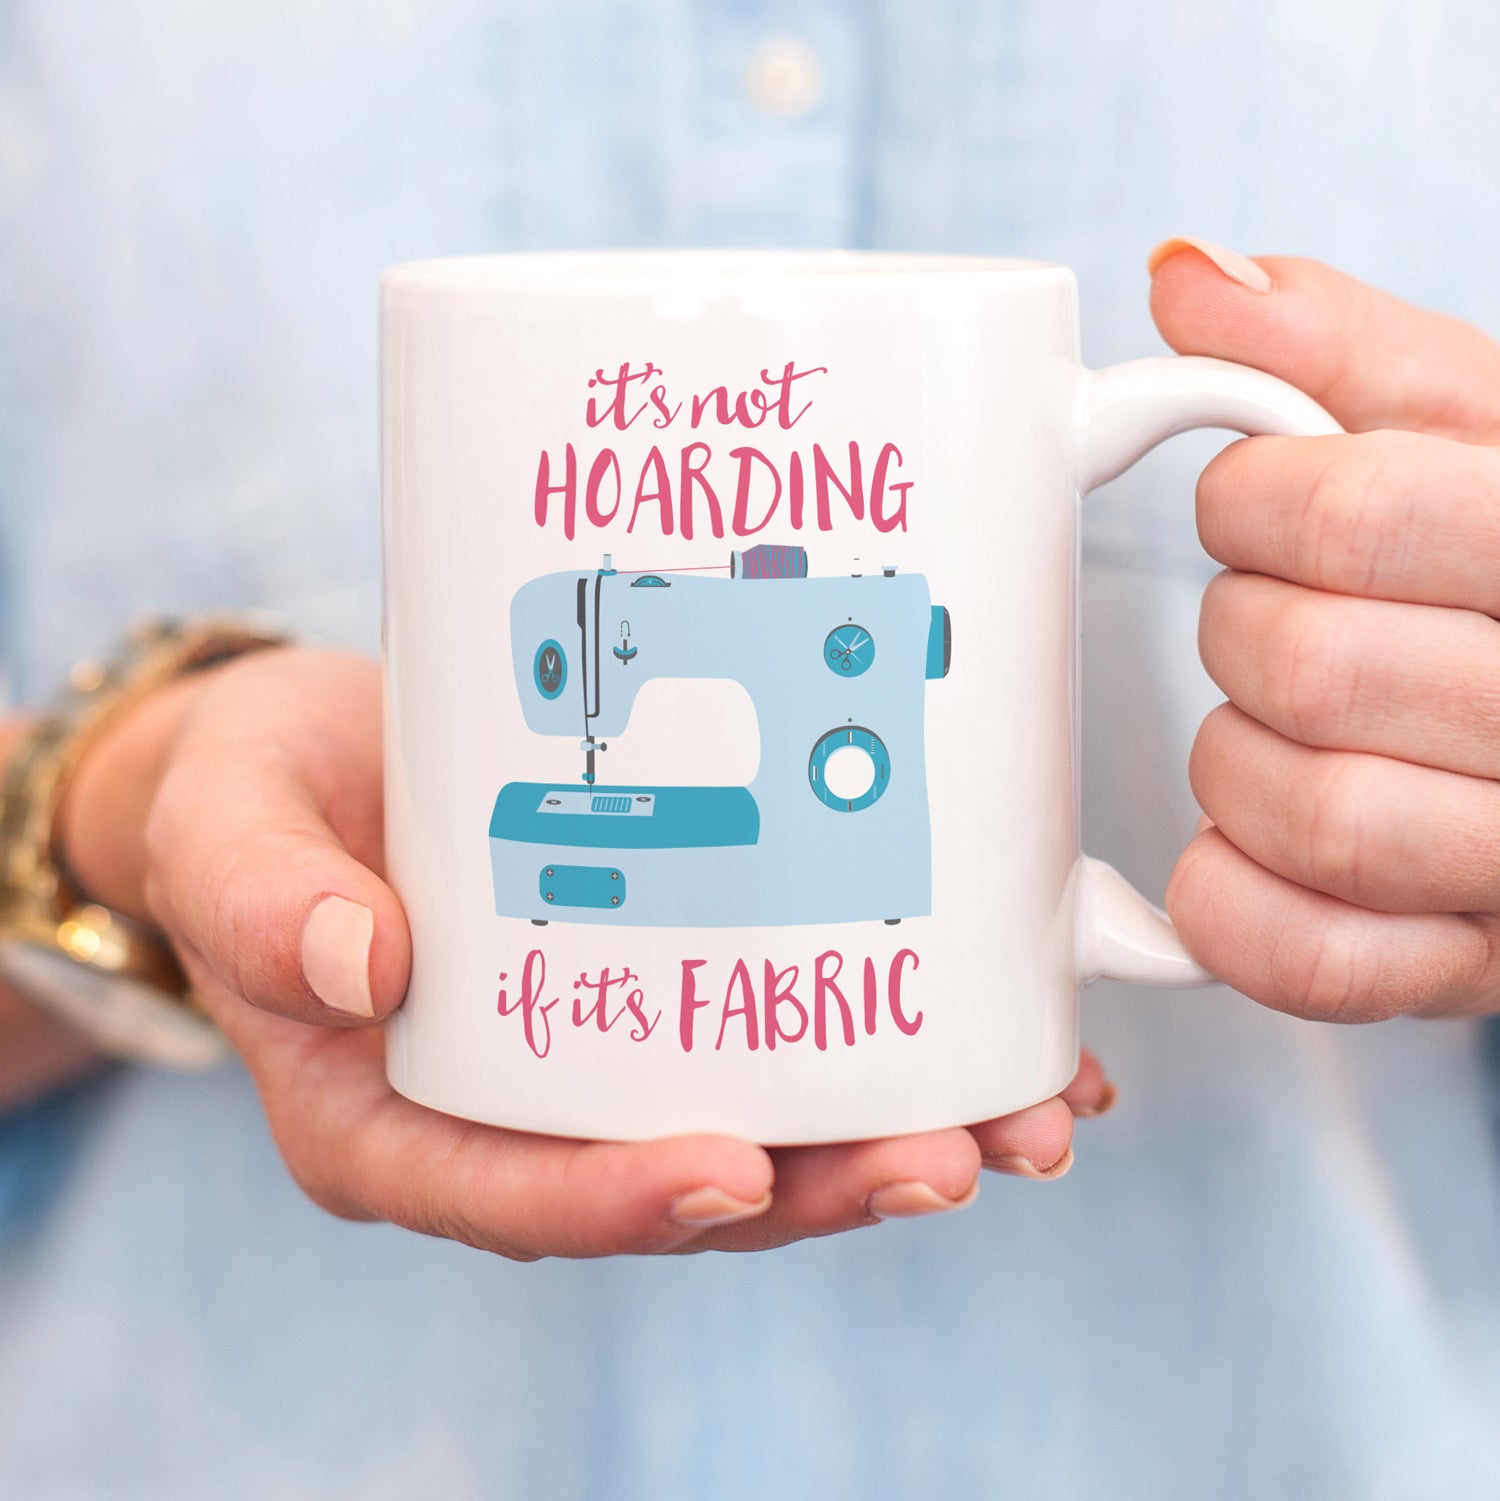 It's not hoarding if it's fabric mug | quilter gift | sewer gift | pipsy.com